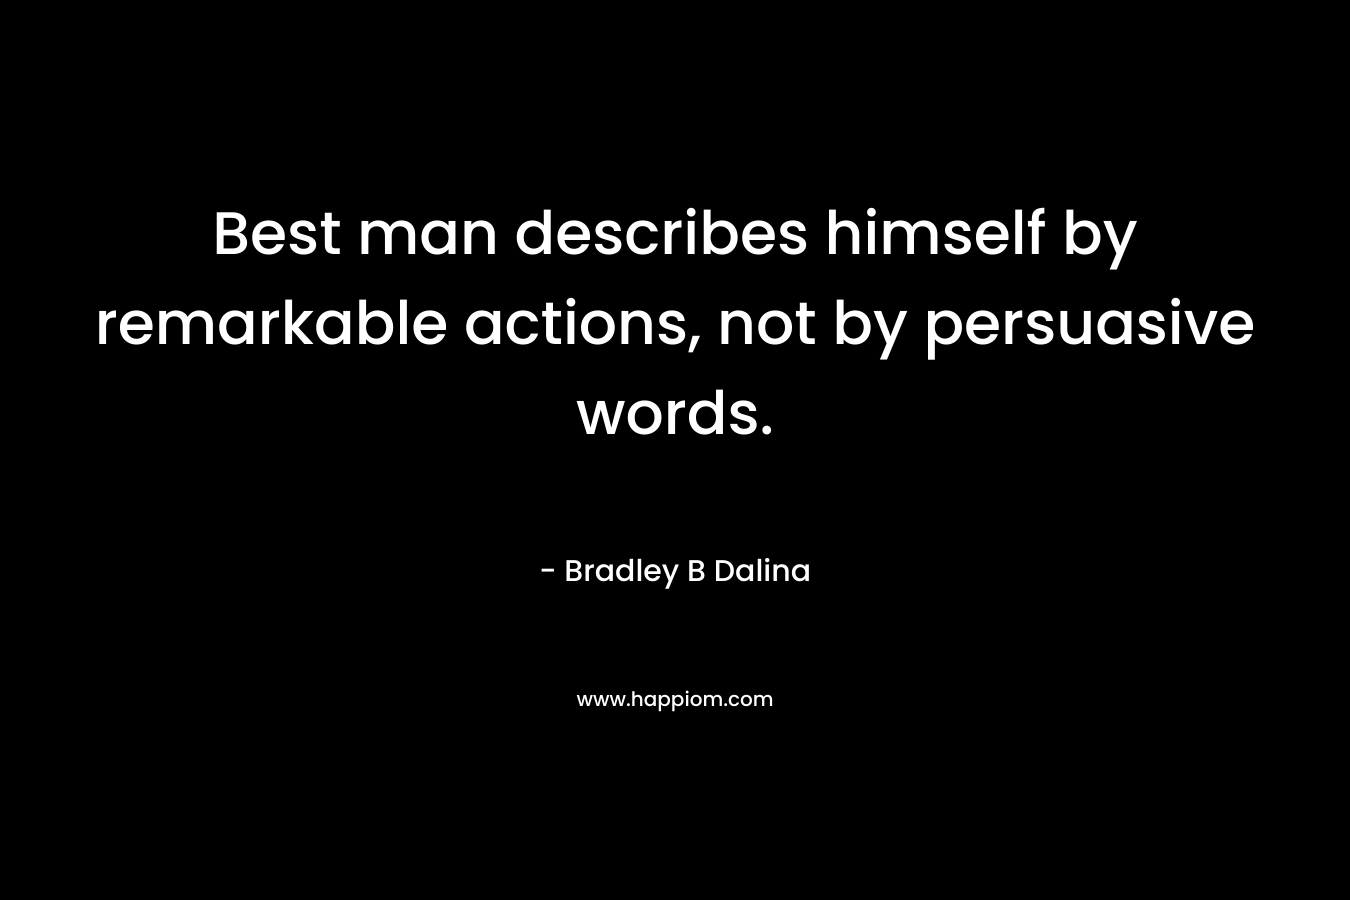 Best man describes himself by remarkable actions, not by persuasive words. – Bradley B Dalina